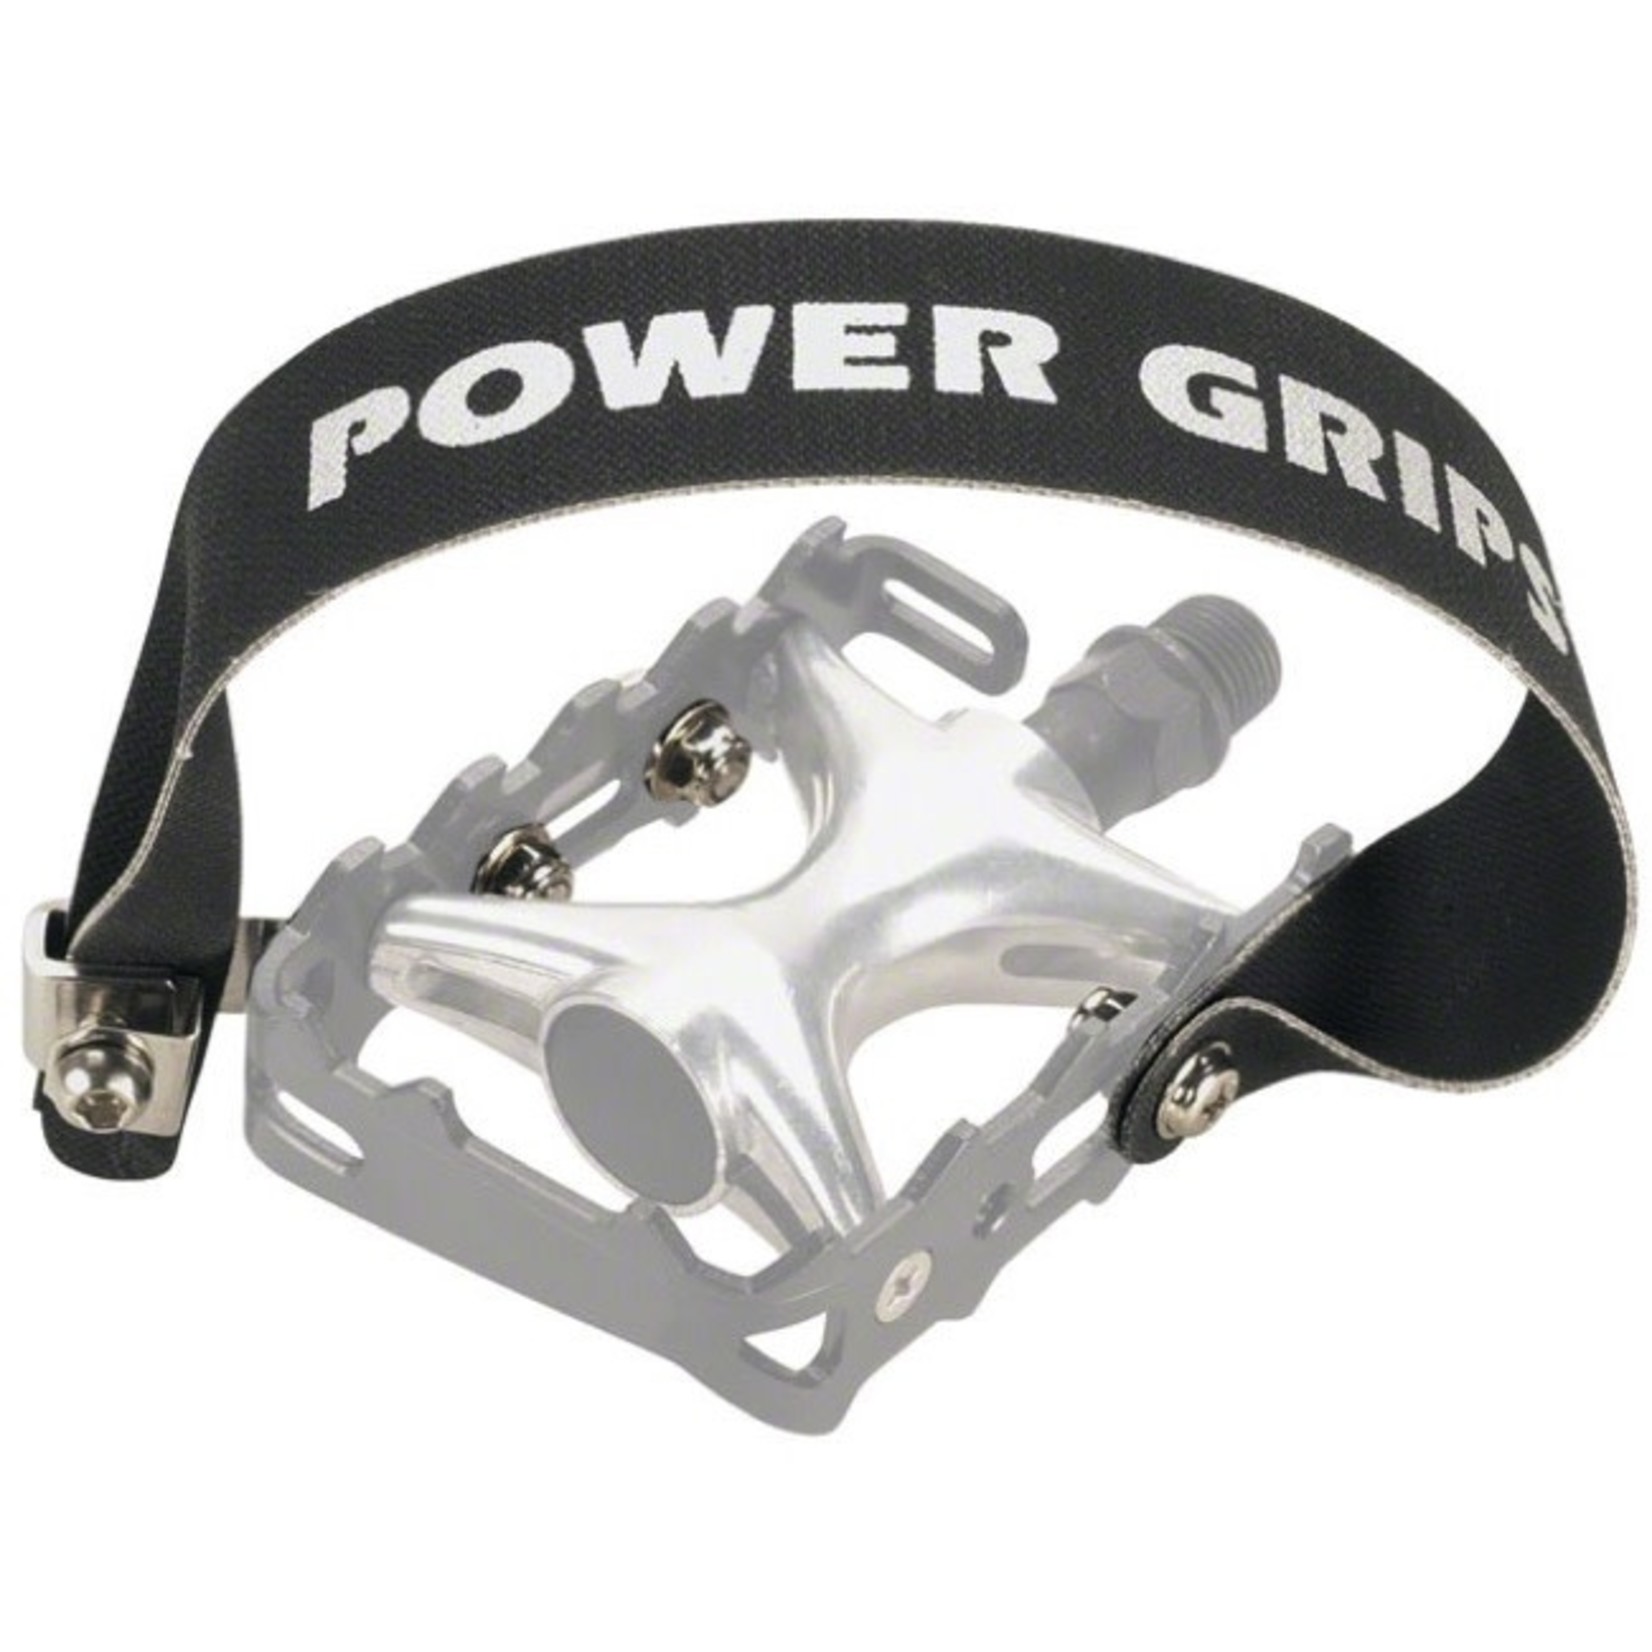 Power Grips Power Grips Standard (295mm) with Hardware, Black